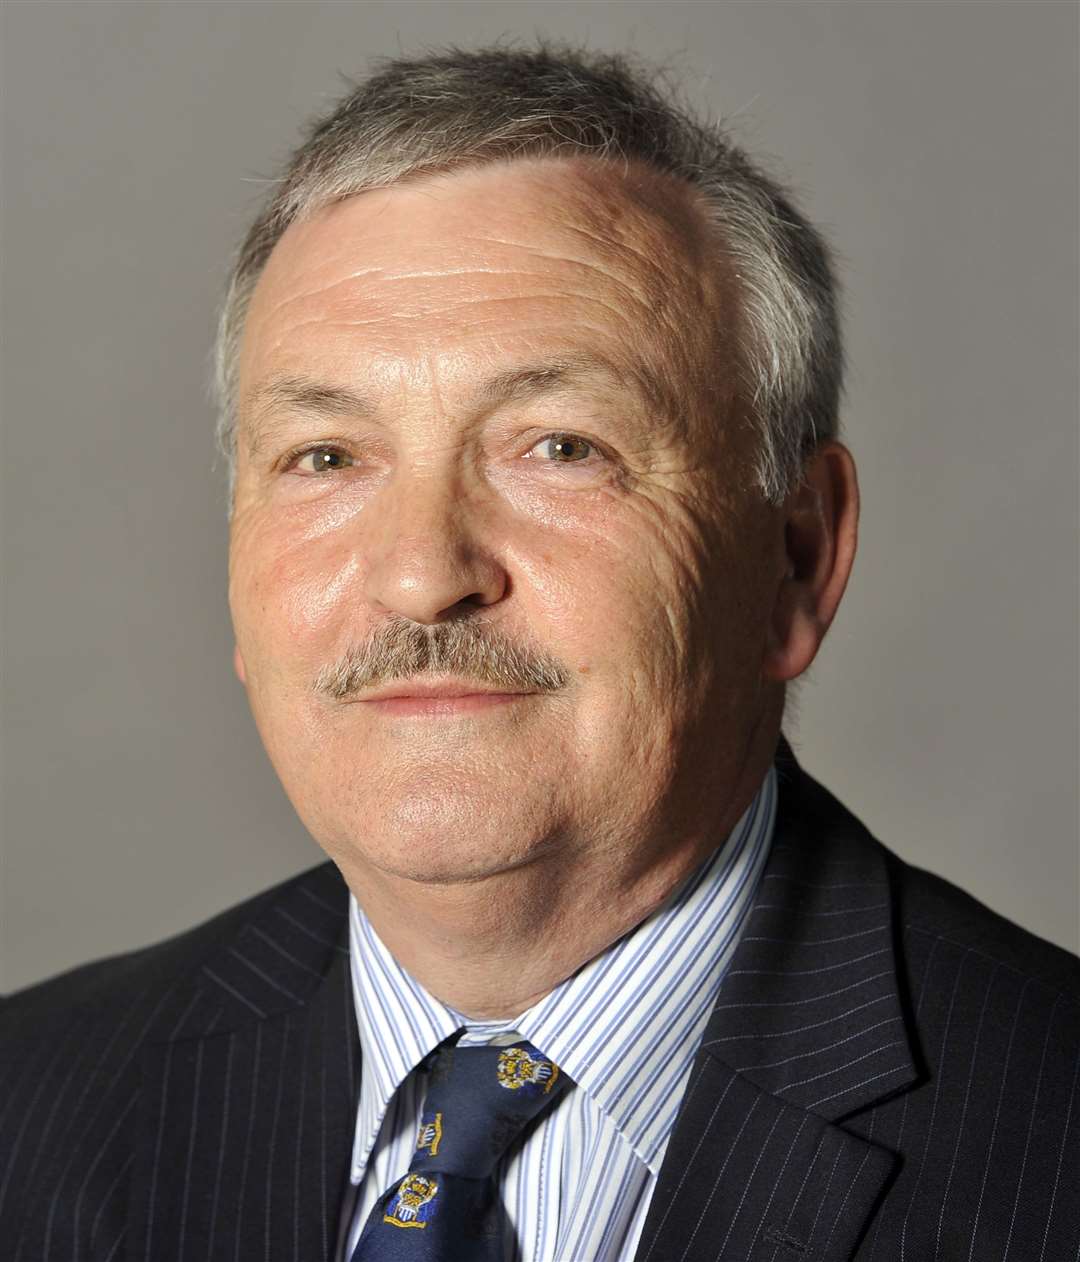 Medway Council leader Alan Jarrett believes the increase in Medway's infection rate is due to more people from Swale and Thanet being admitted to Medway hospitals